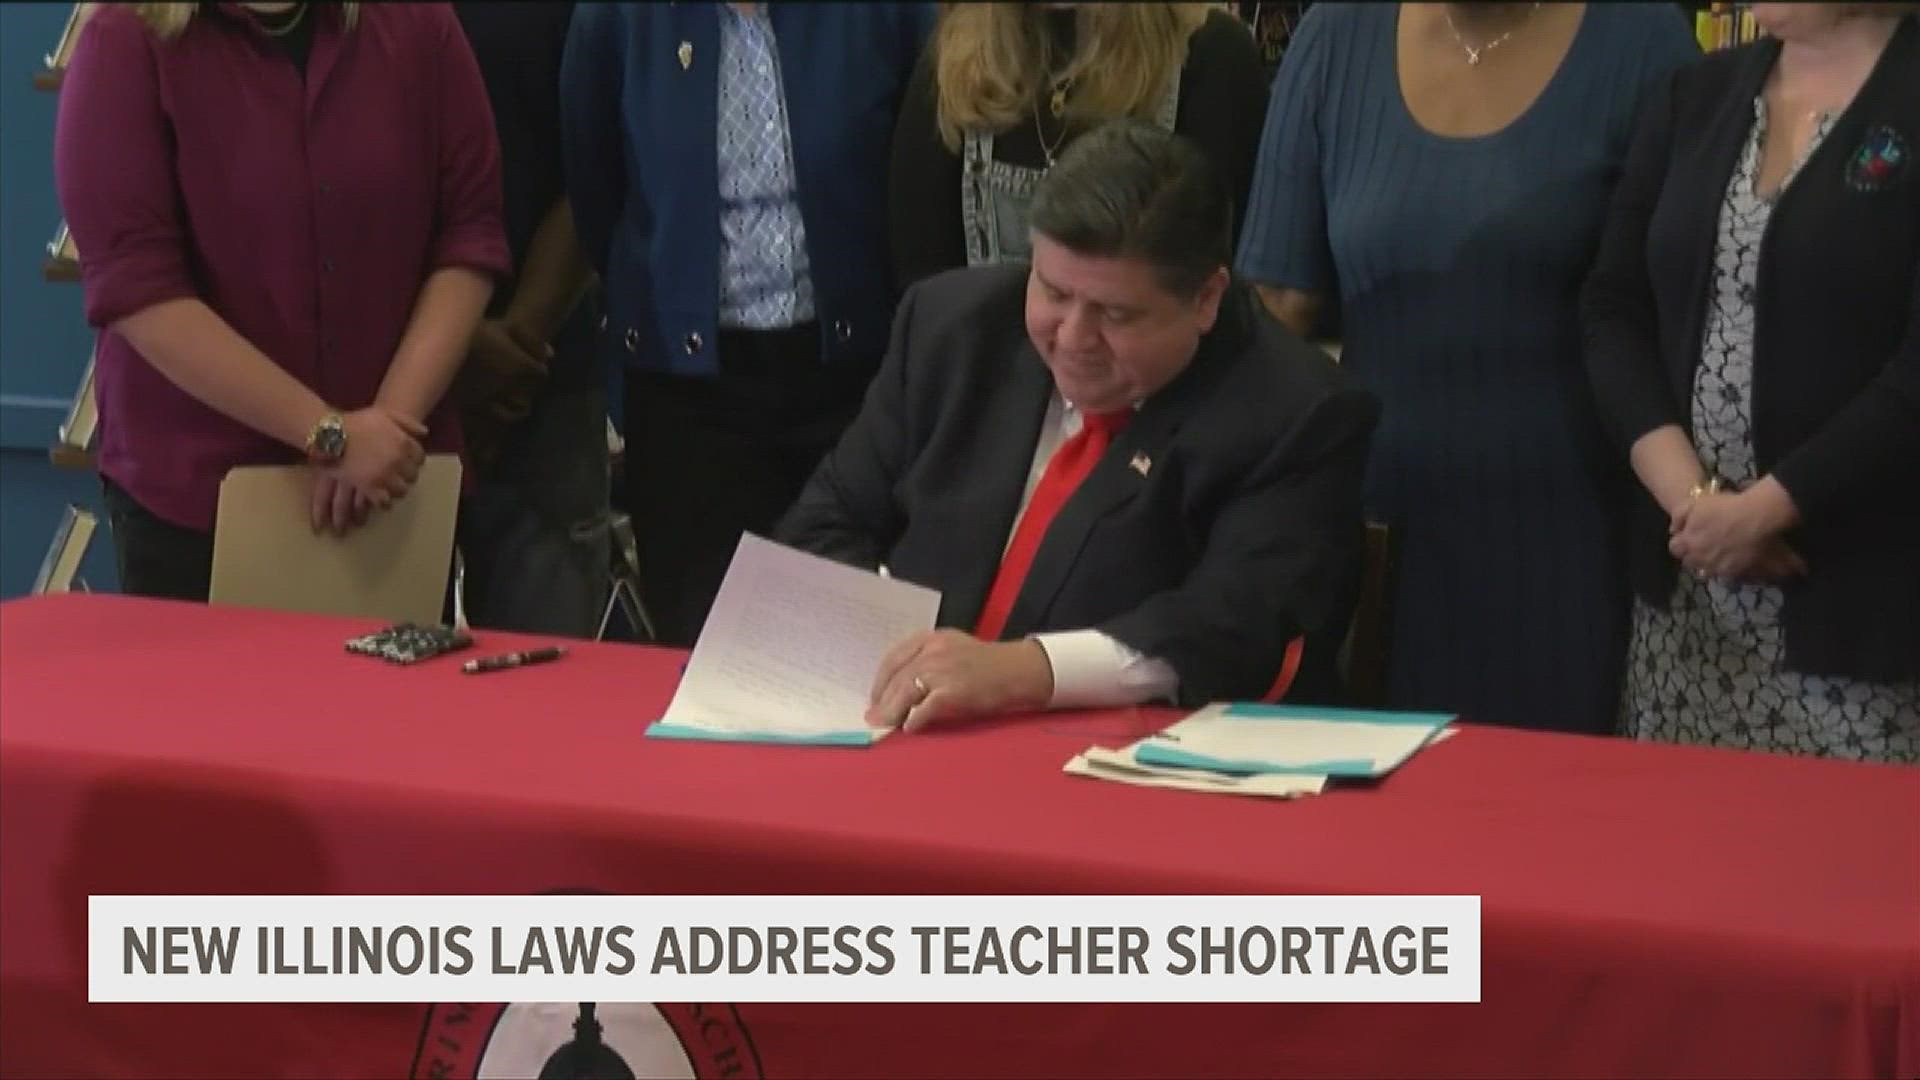 Illinois Gov. JB Pritzker said the new bills simplify the educator licensing process, reduce license fees and create more opportunities for prospective educators.